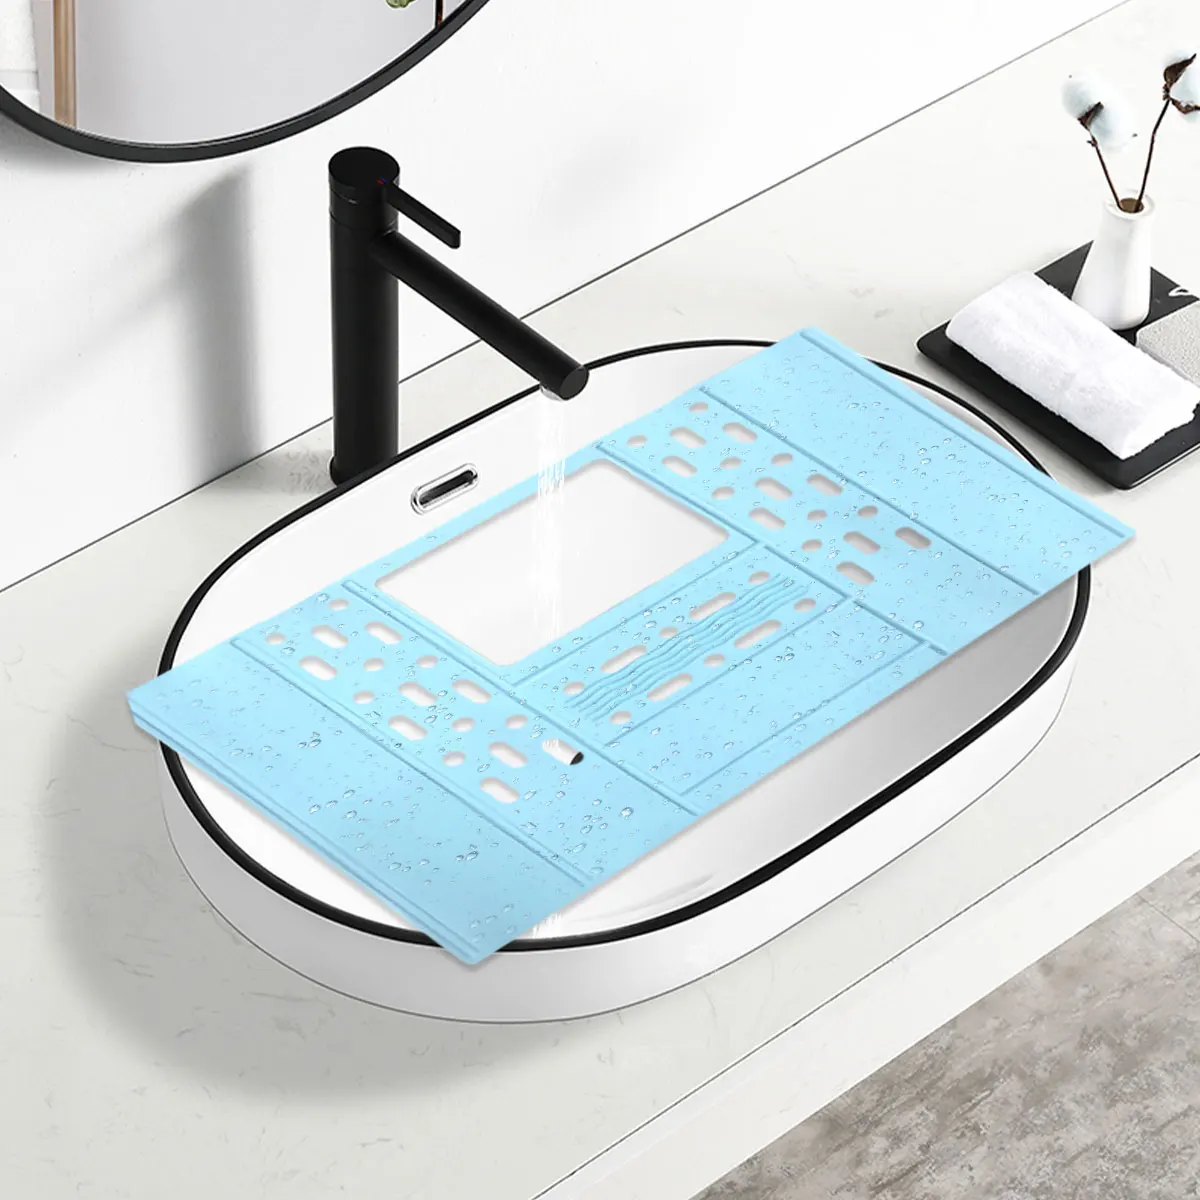 https://ae01.alicdn.com/kf/Sd188223b8ece4146943d110893f03ec8E/New-Multifunctional-Collapsible-Sink-Cover-Silicone-Sink-Makeup-Mat-Wash-Basin-Sink-Mat-Expansion-Surface.jpg